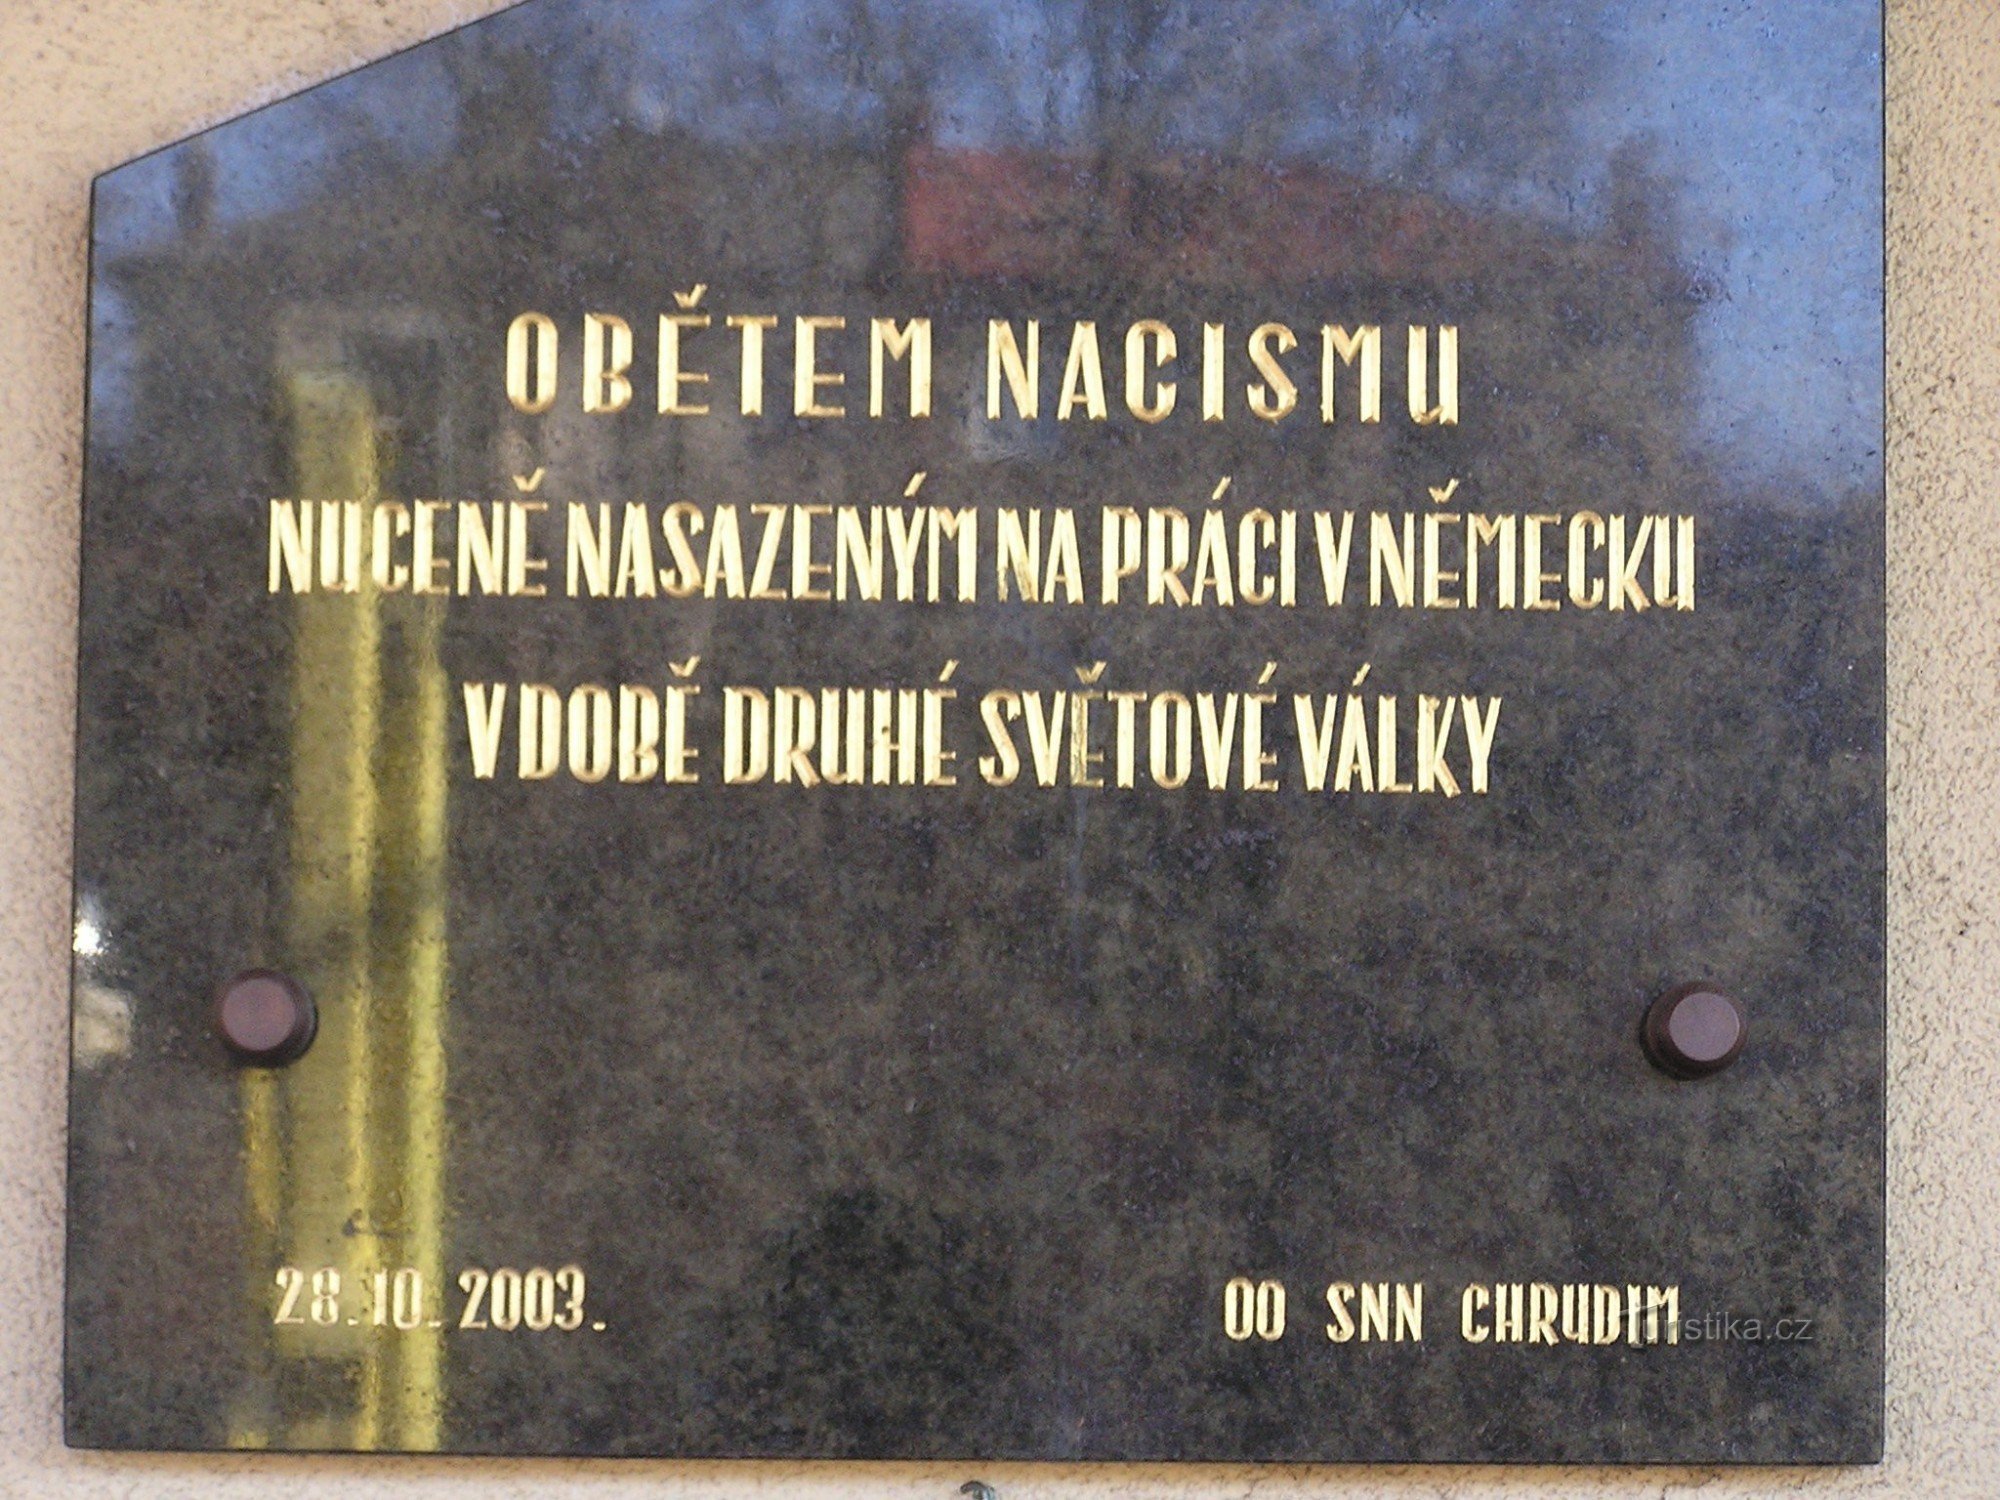 Chrudim - commemorative plaque to those forcibly deployed in Germany